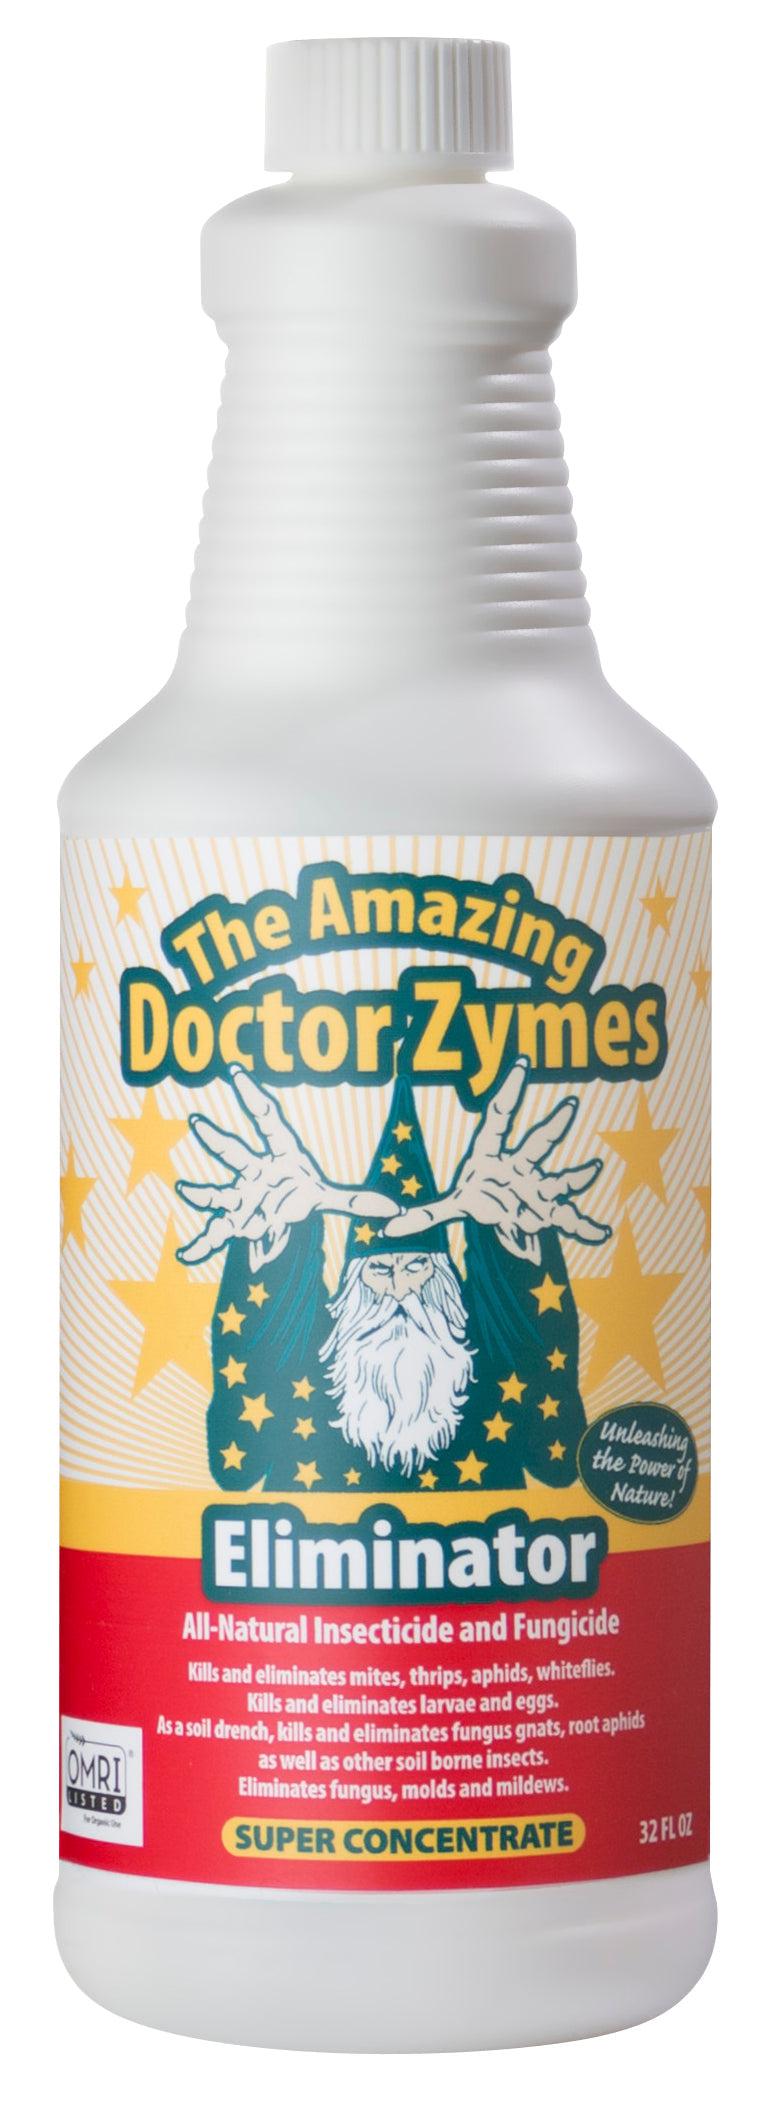 The Amazing Doctor Zymes 1 Qt Eliminator Concentrate (Case of 12)